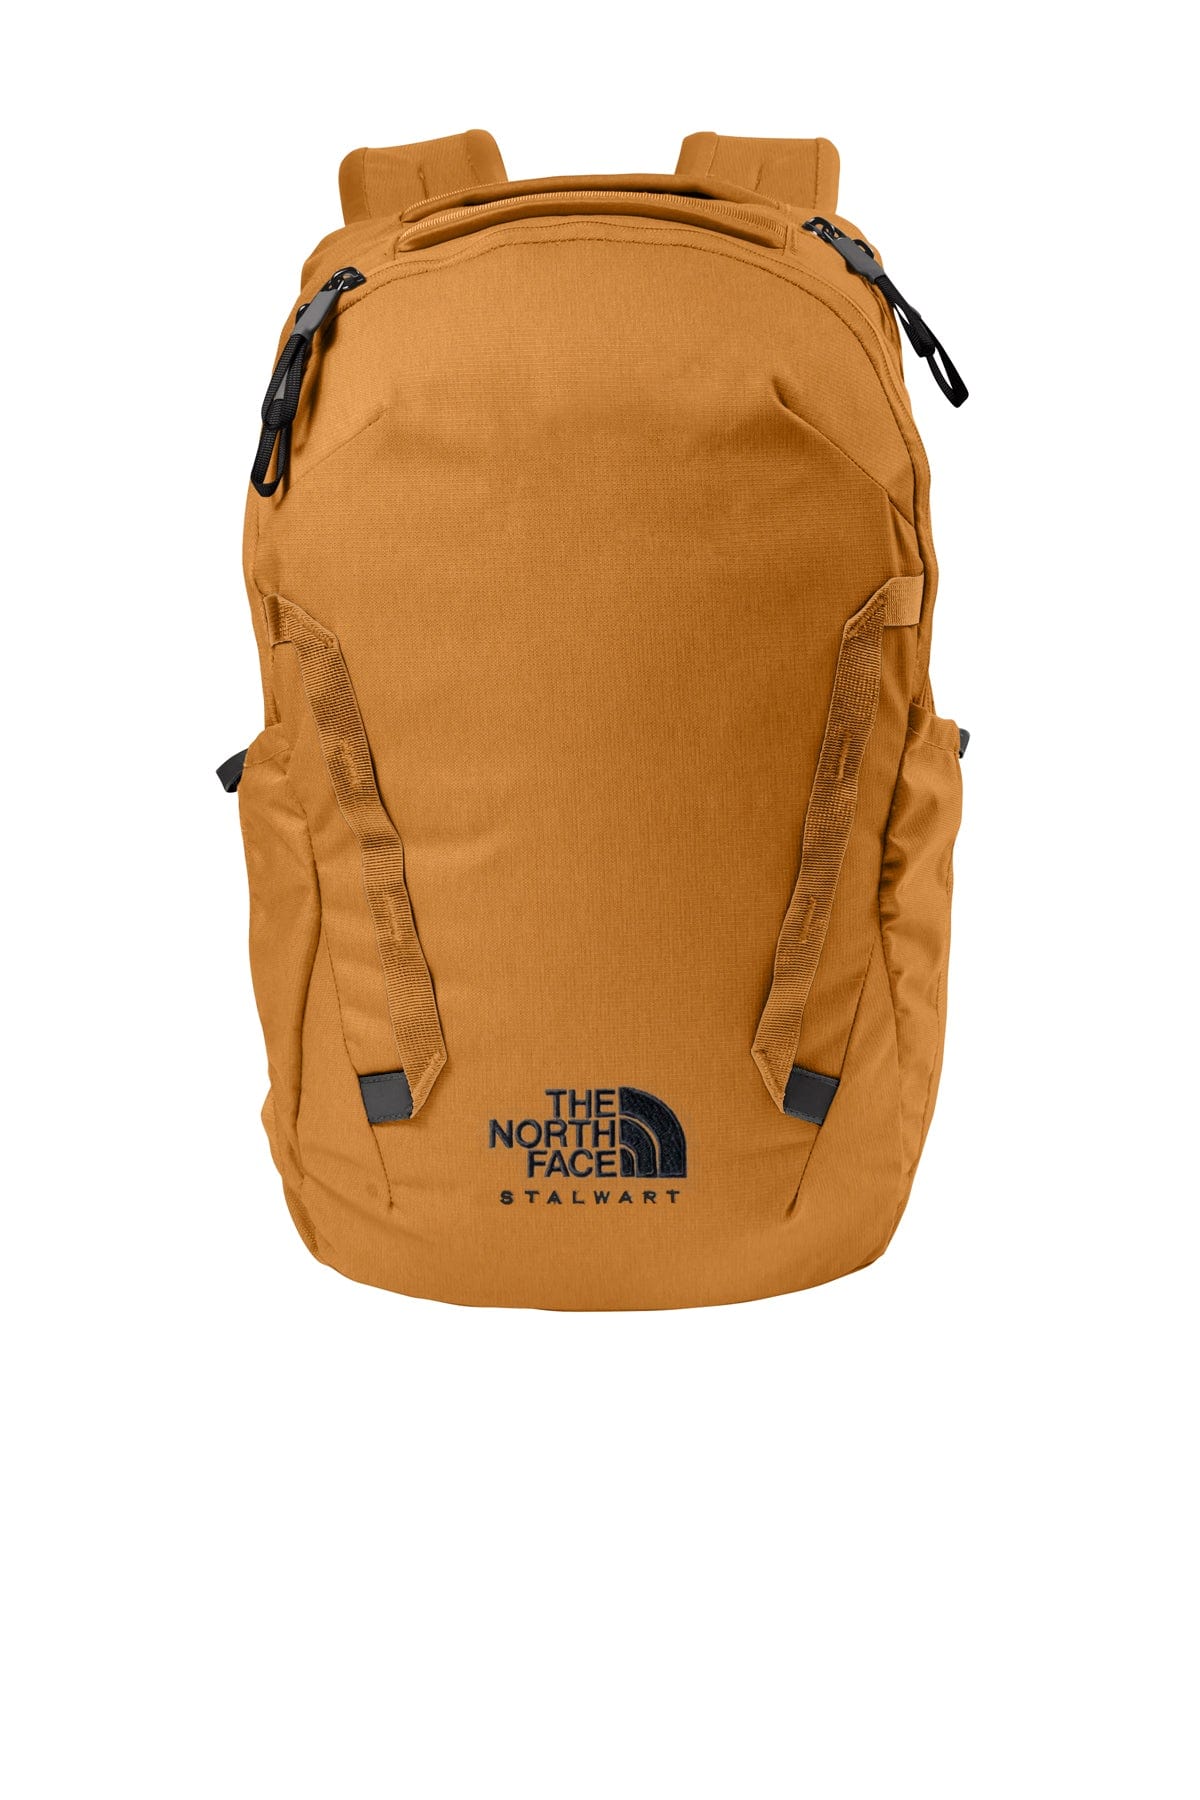 Timber Tan Custom The North Face Stalwart Backpack